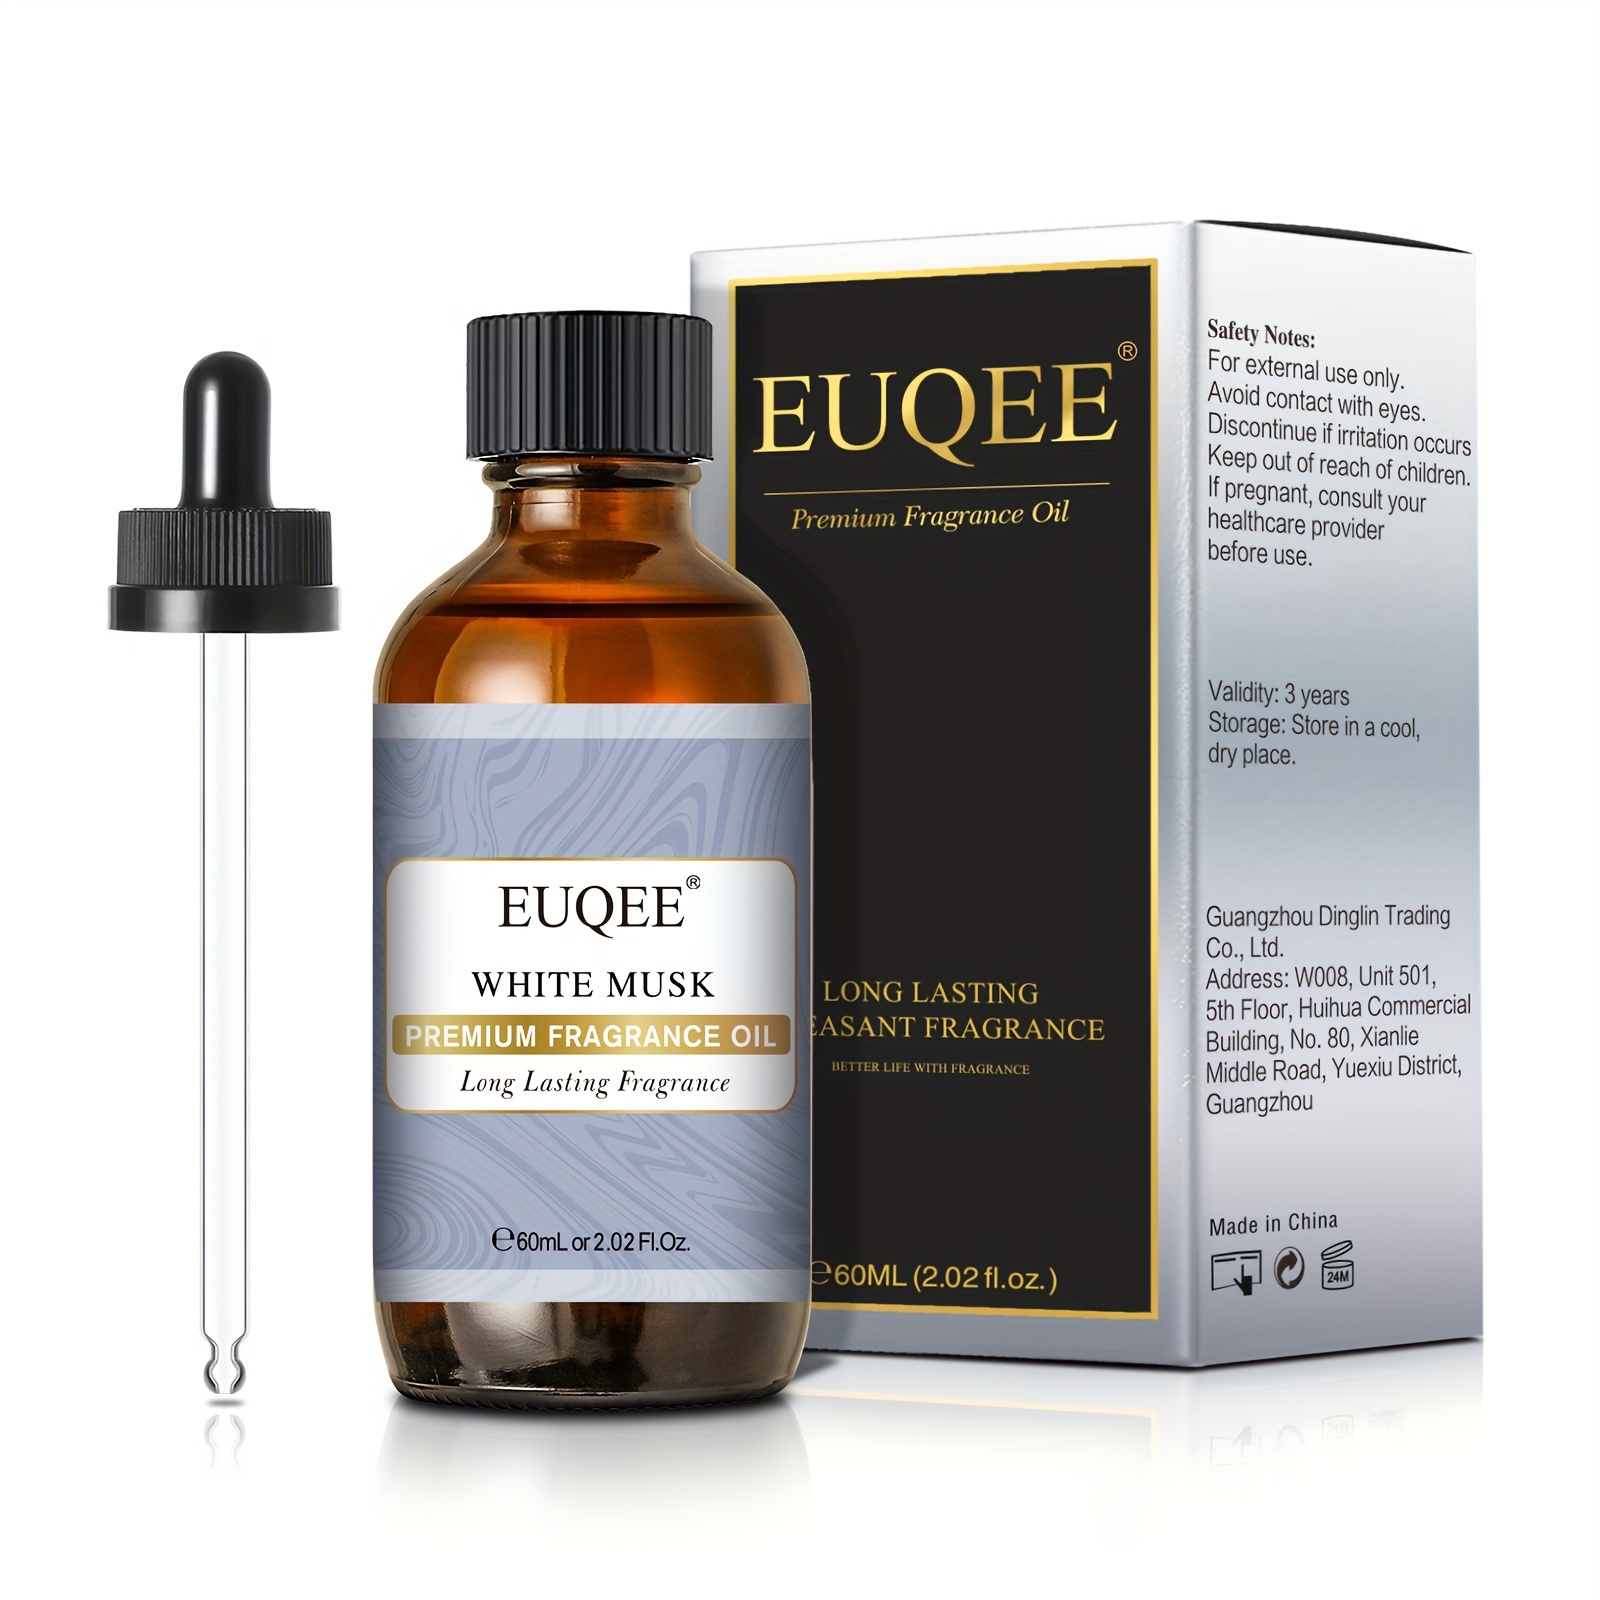 

1pc 60ml/2.03fl.oz White Musk Fragrance Essential Oil For Diffusers, Humidifiers, Soap Making